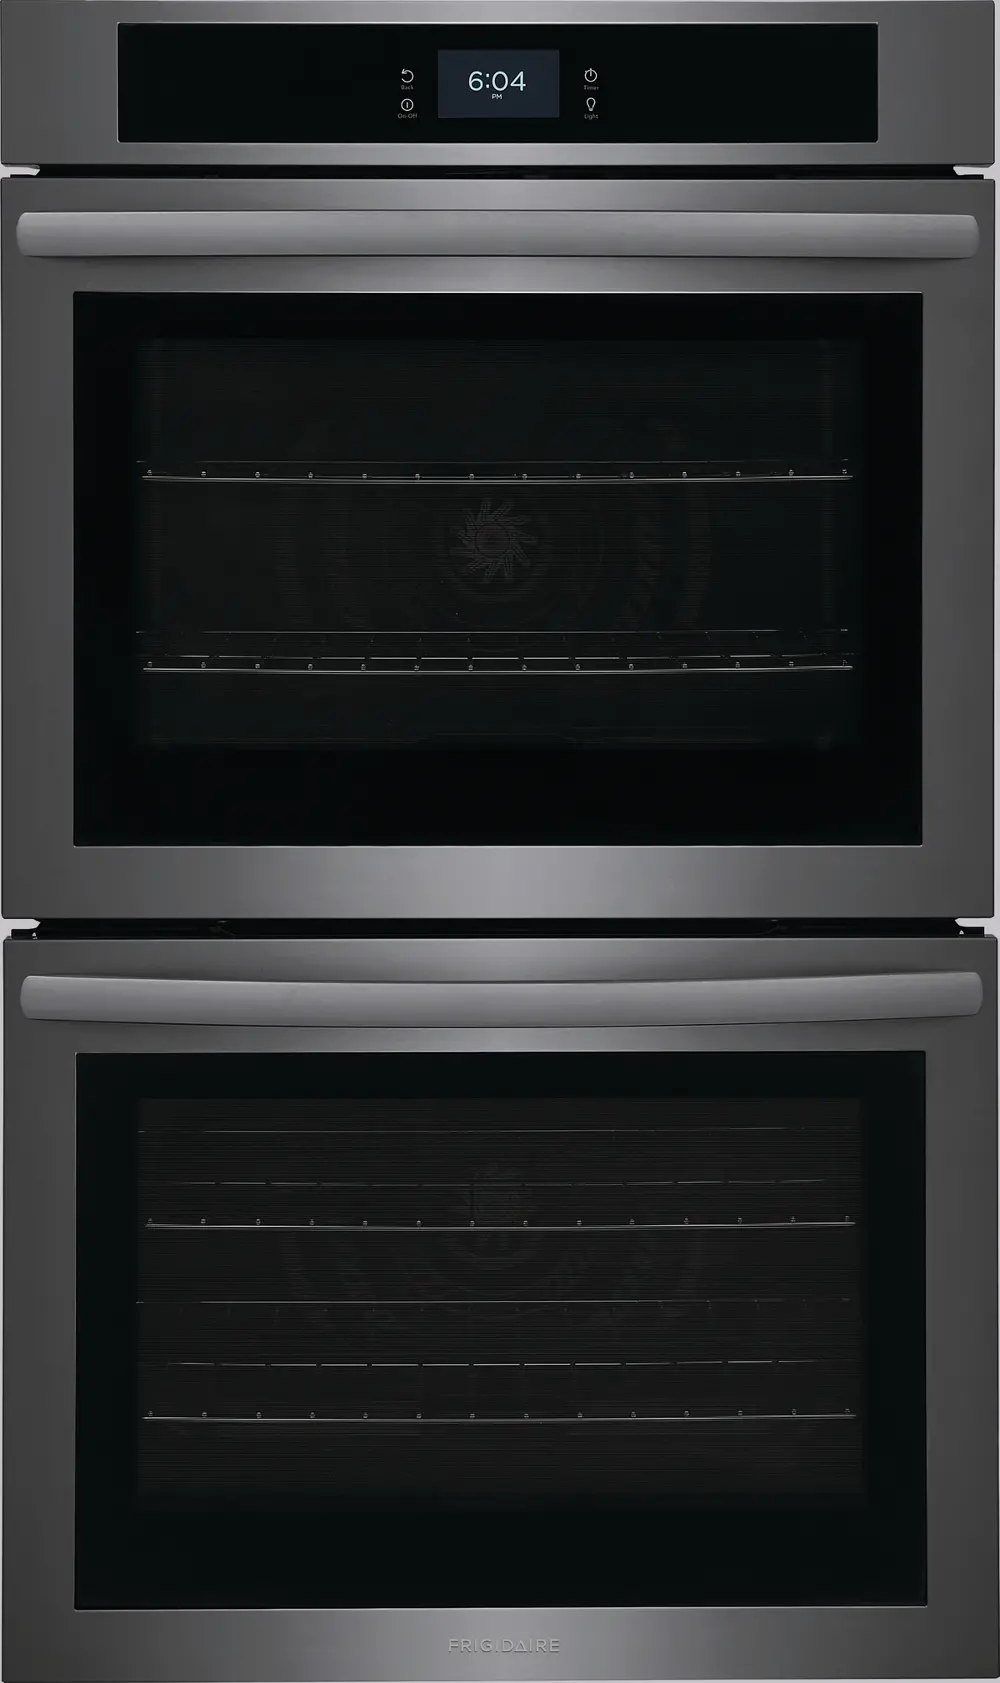 FCWD3027AD Frigidaire 10.6 cu ft Double Wall Oven - Black Stainless Steel 30 Inch-1